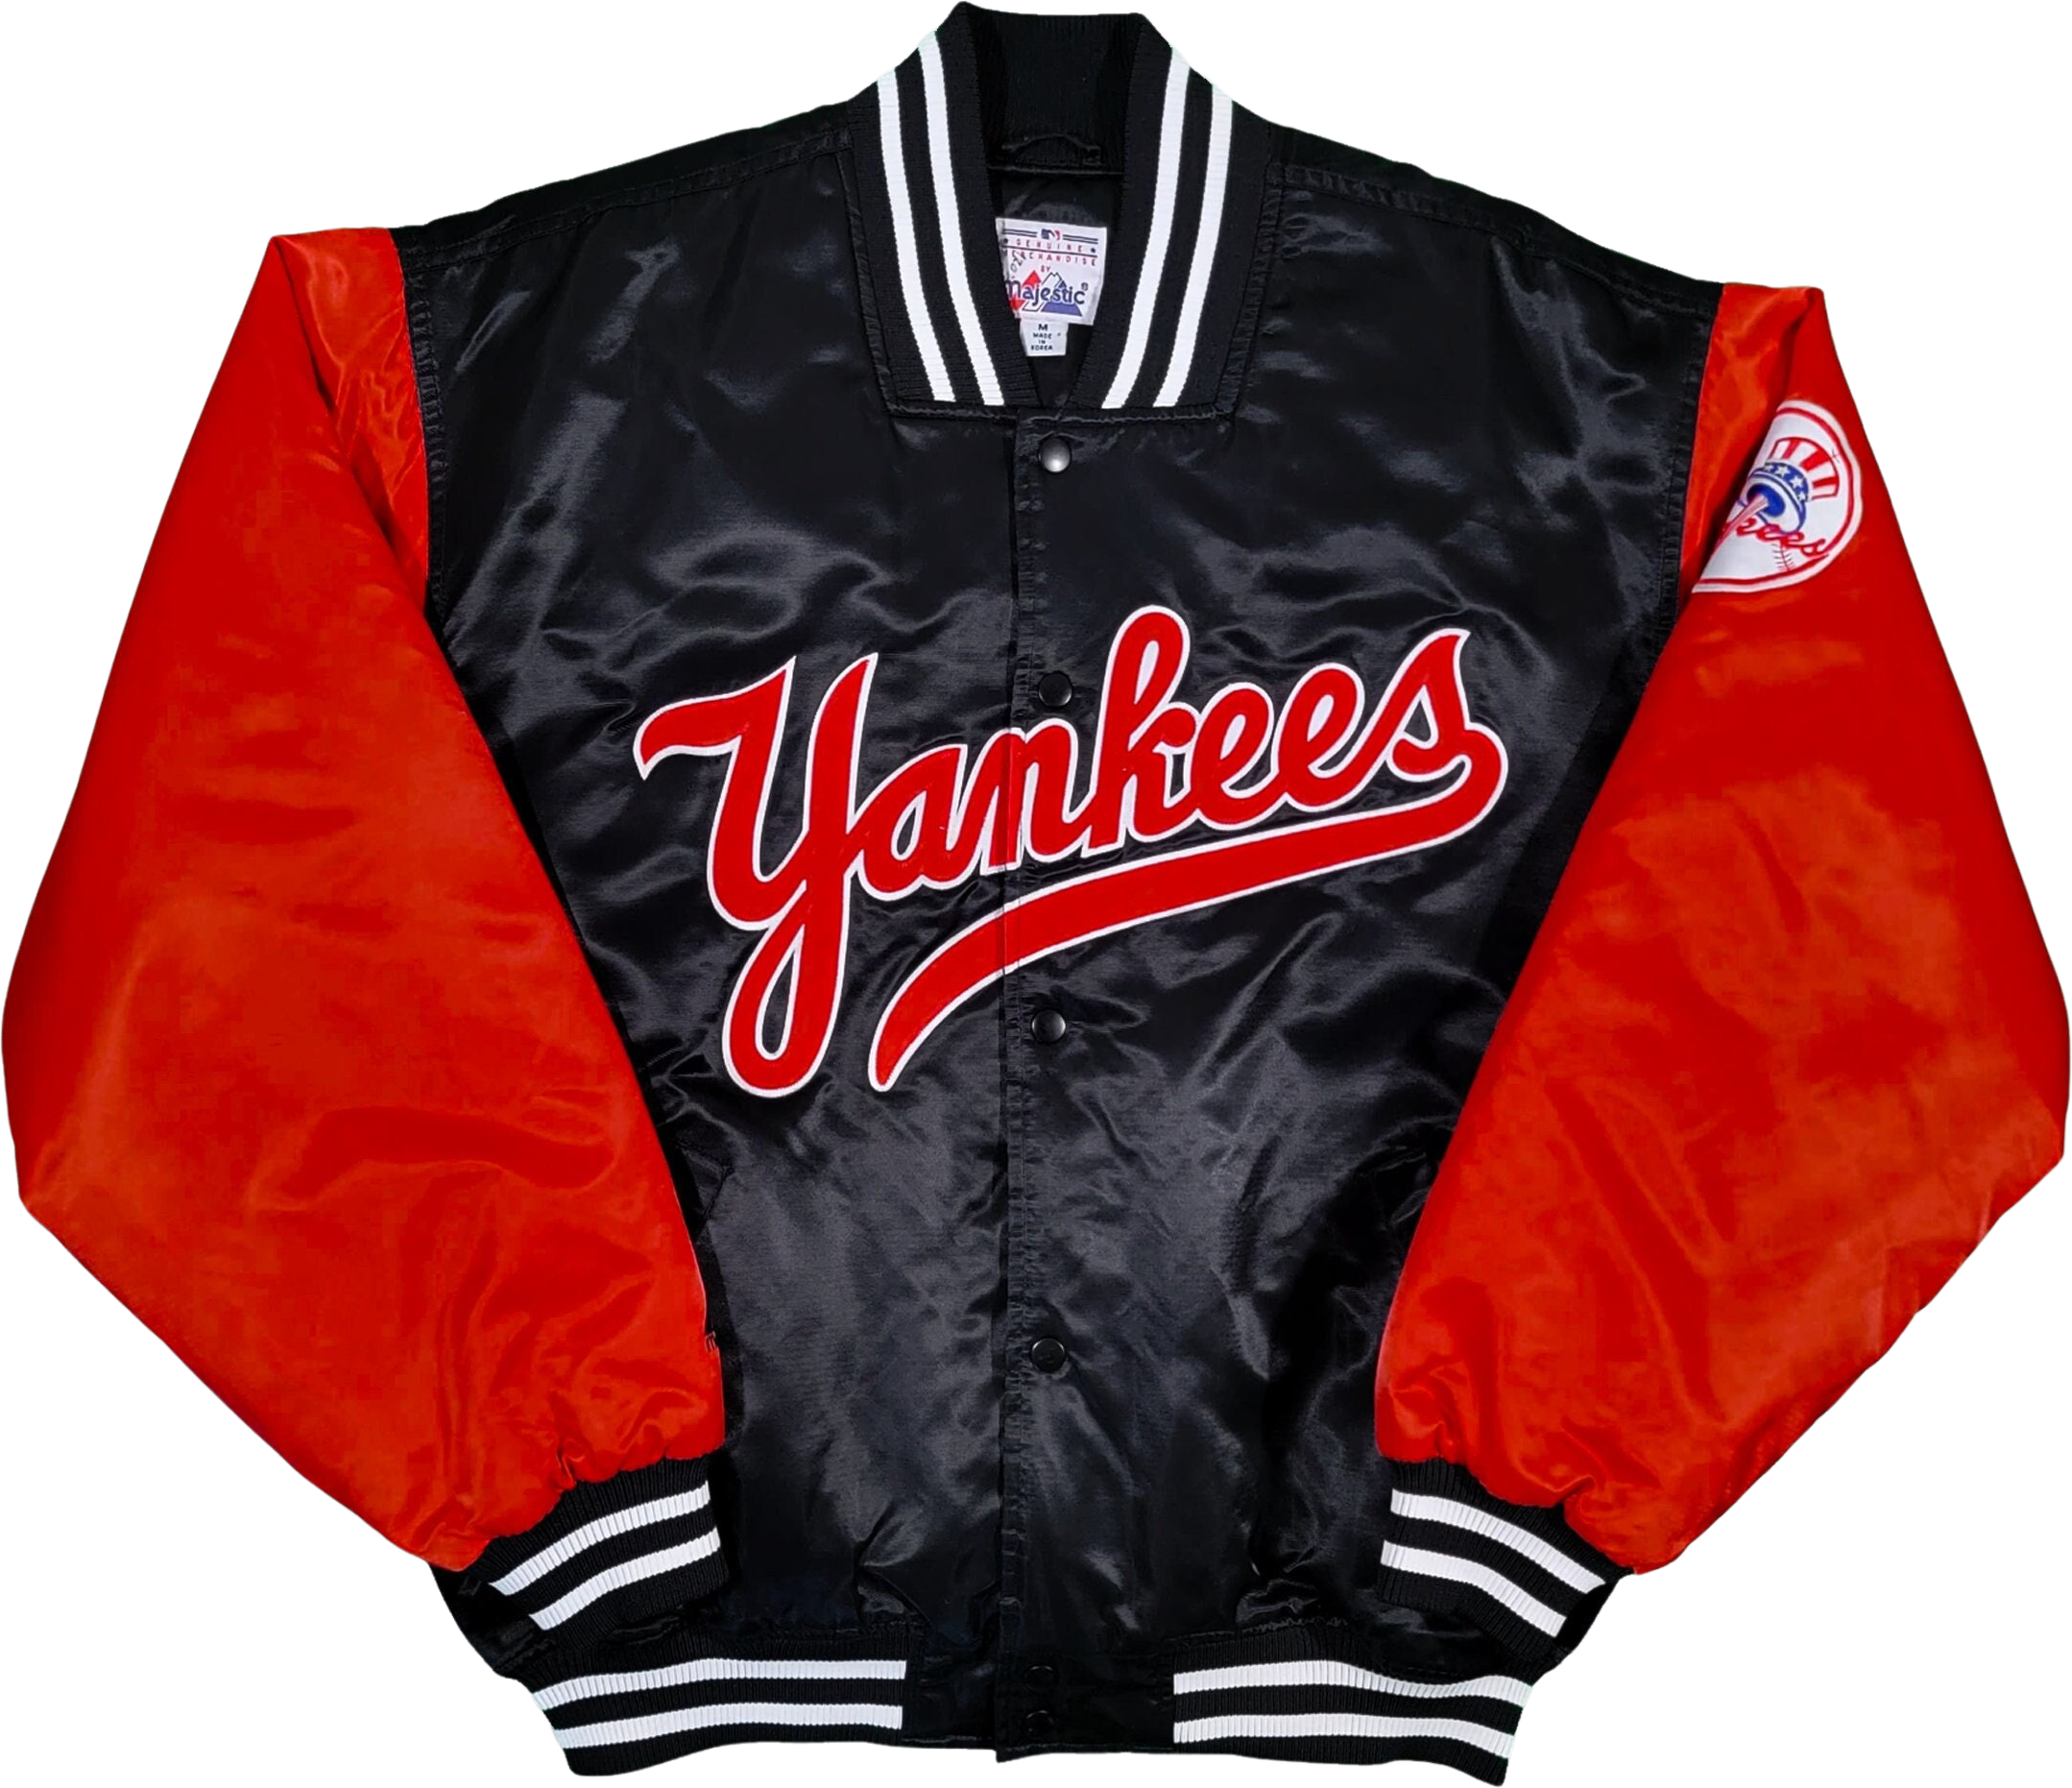 New York Yankees Jersey by Starter, Size 2XL, MLB